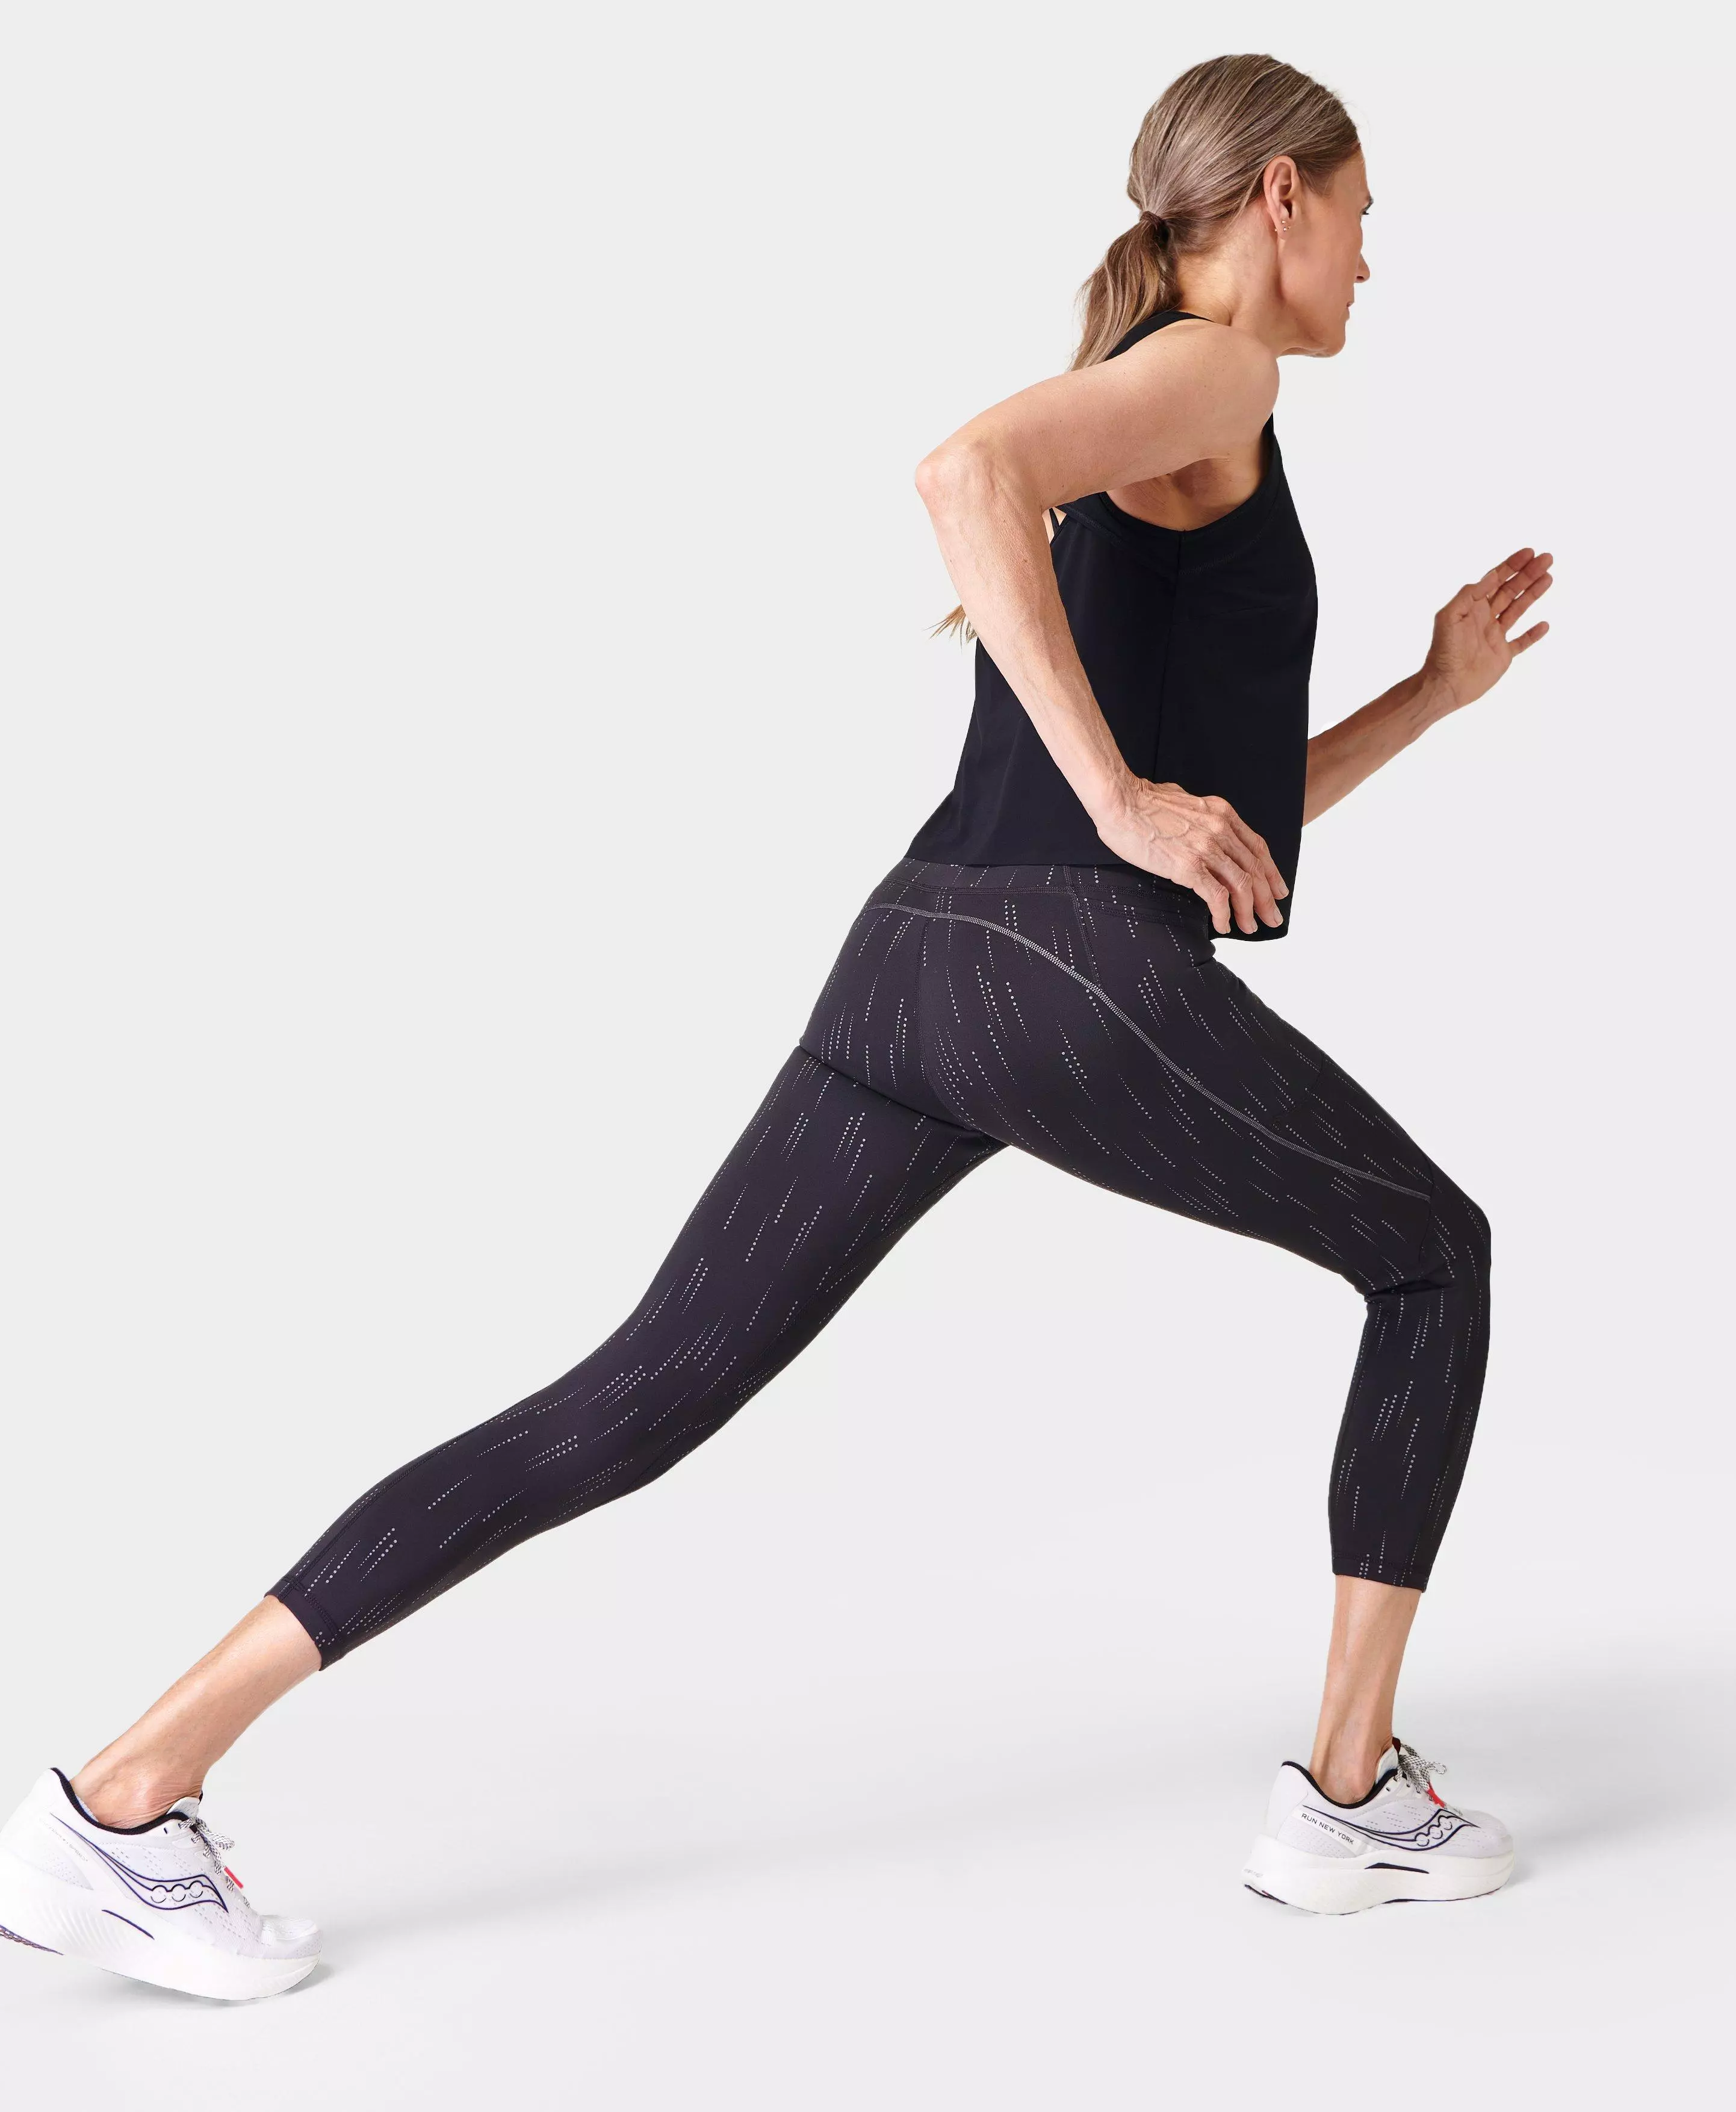 Pockets For Women - Therma Boost 2.0 7/8 Running Leggings